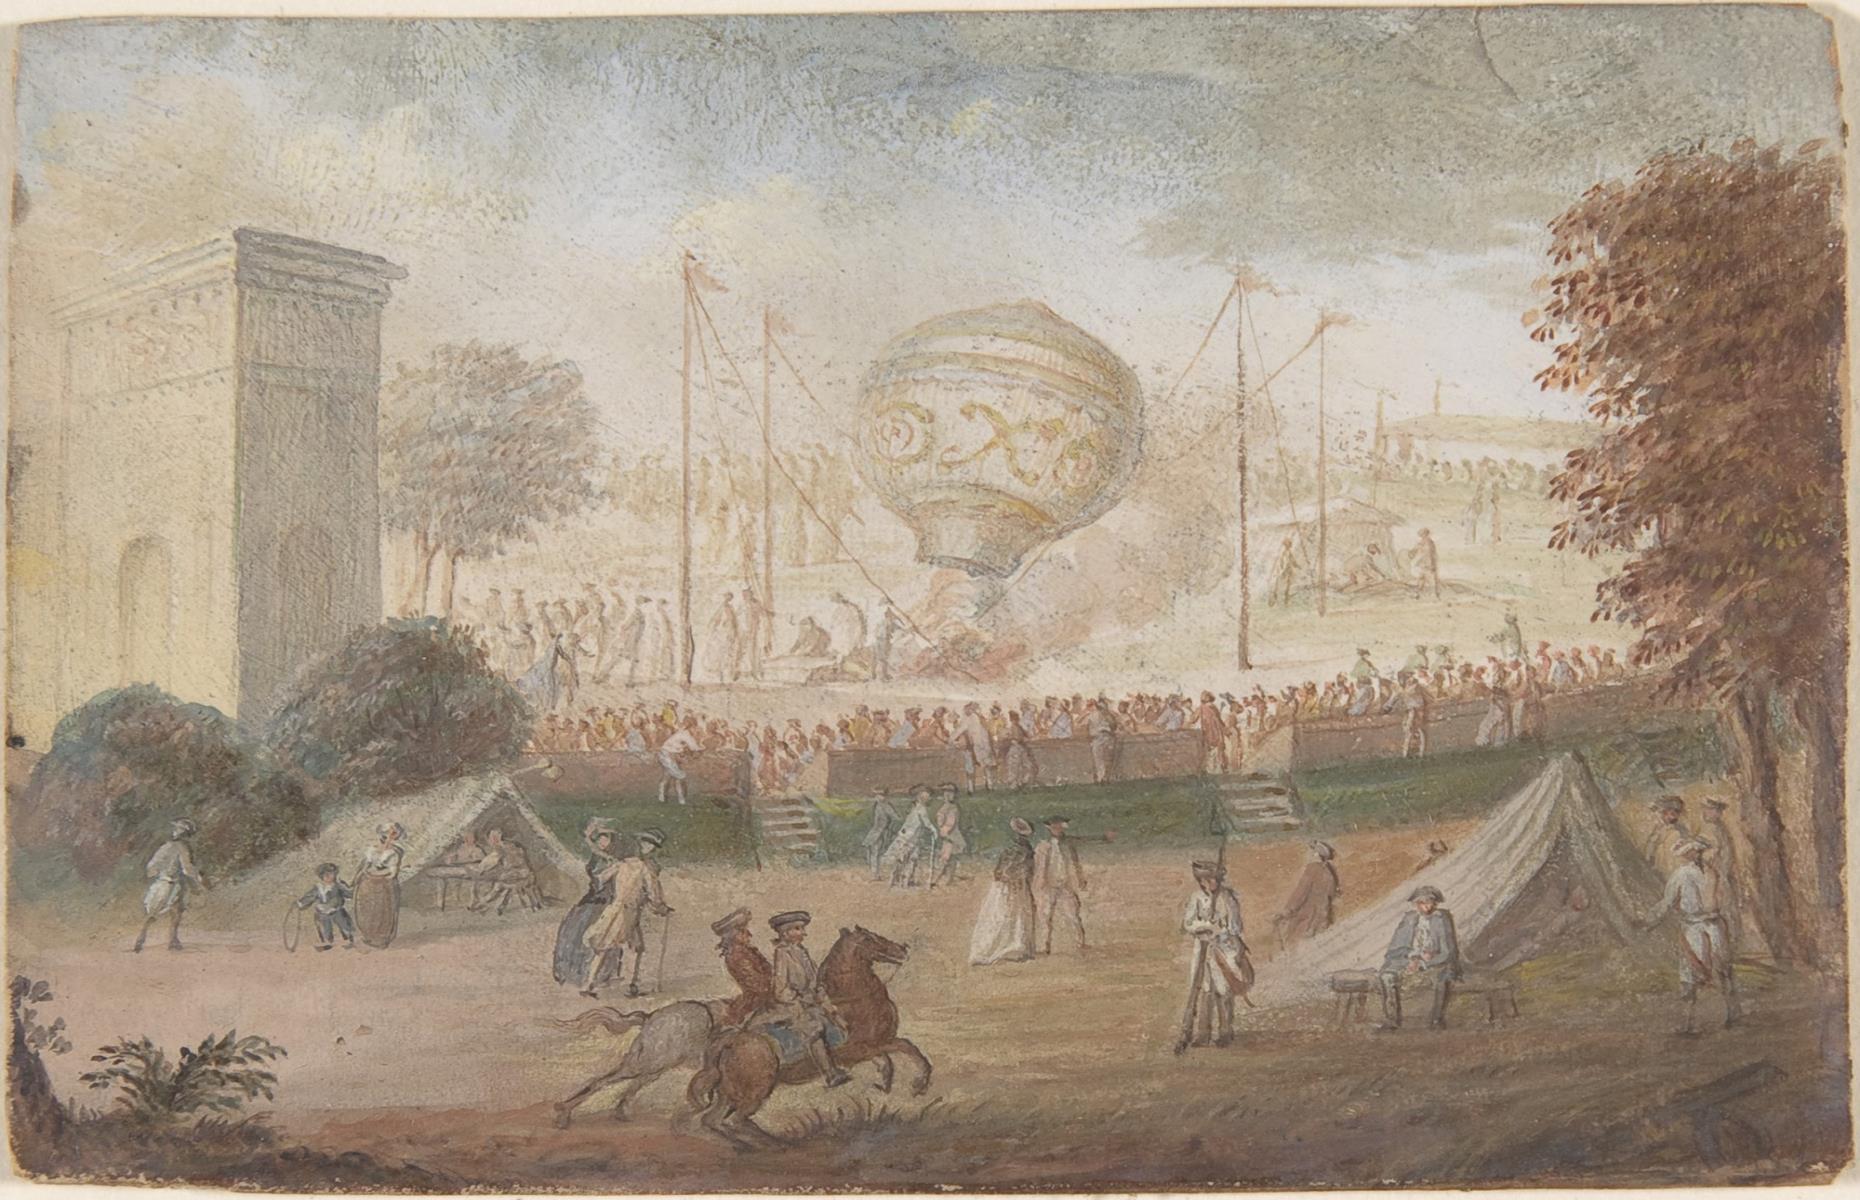 By 1783, we had lift off. The hot air and hydrogen balloon was invented in France then in 1807, the first commercially viable steamboat set off on its maiden voyage from New York. The steam revolution didn’t slow down, with the first steam engine railway connecting Liverpool and Manchester in 1830. Faster travel was full steam ahead.